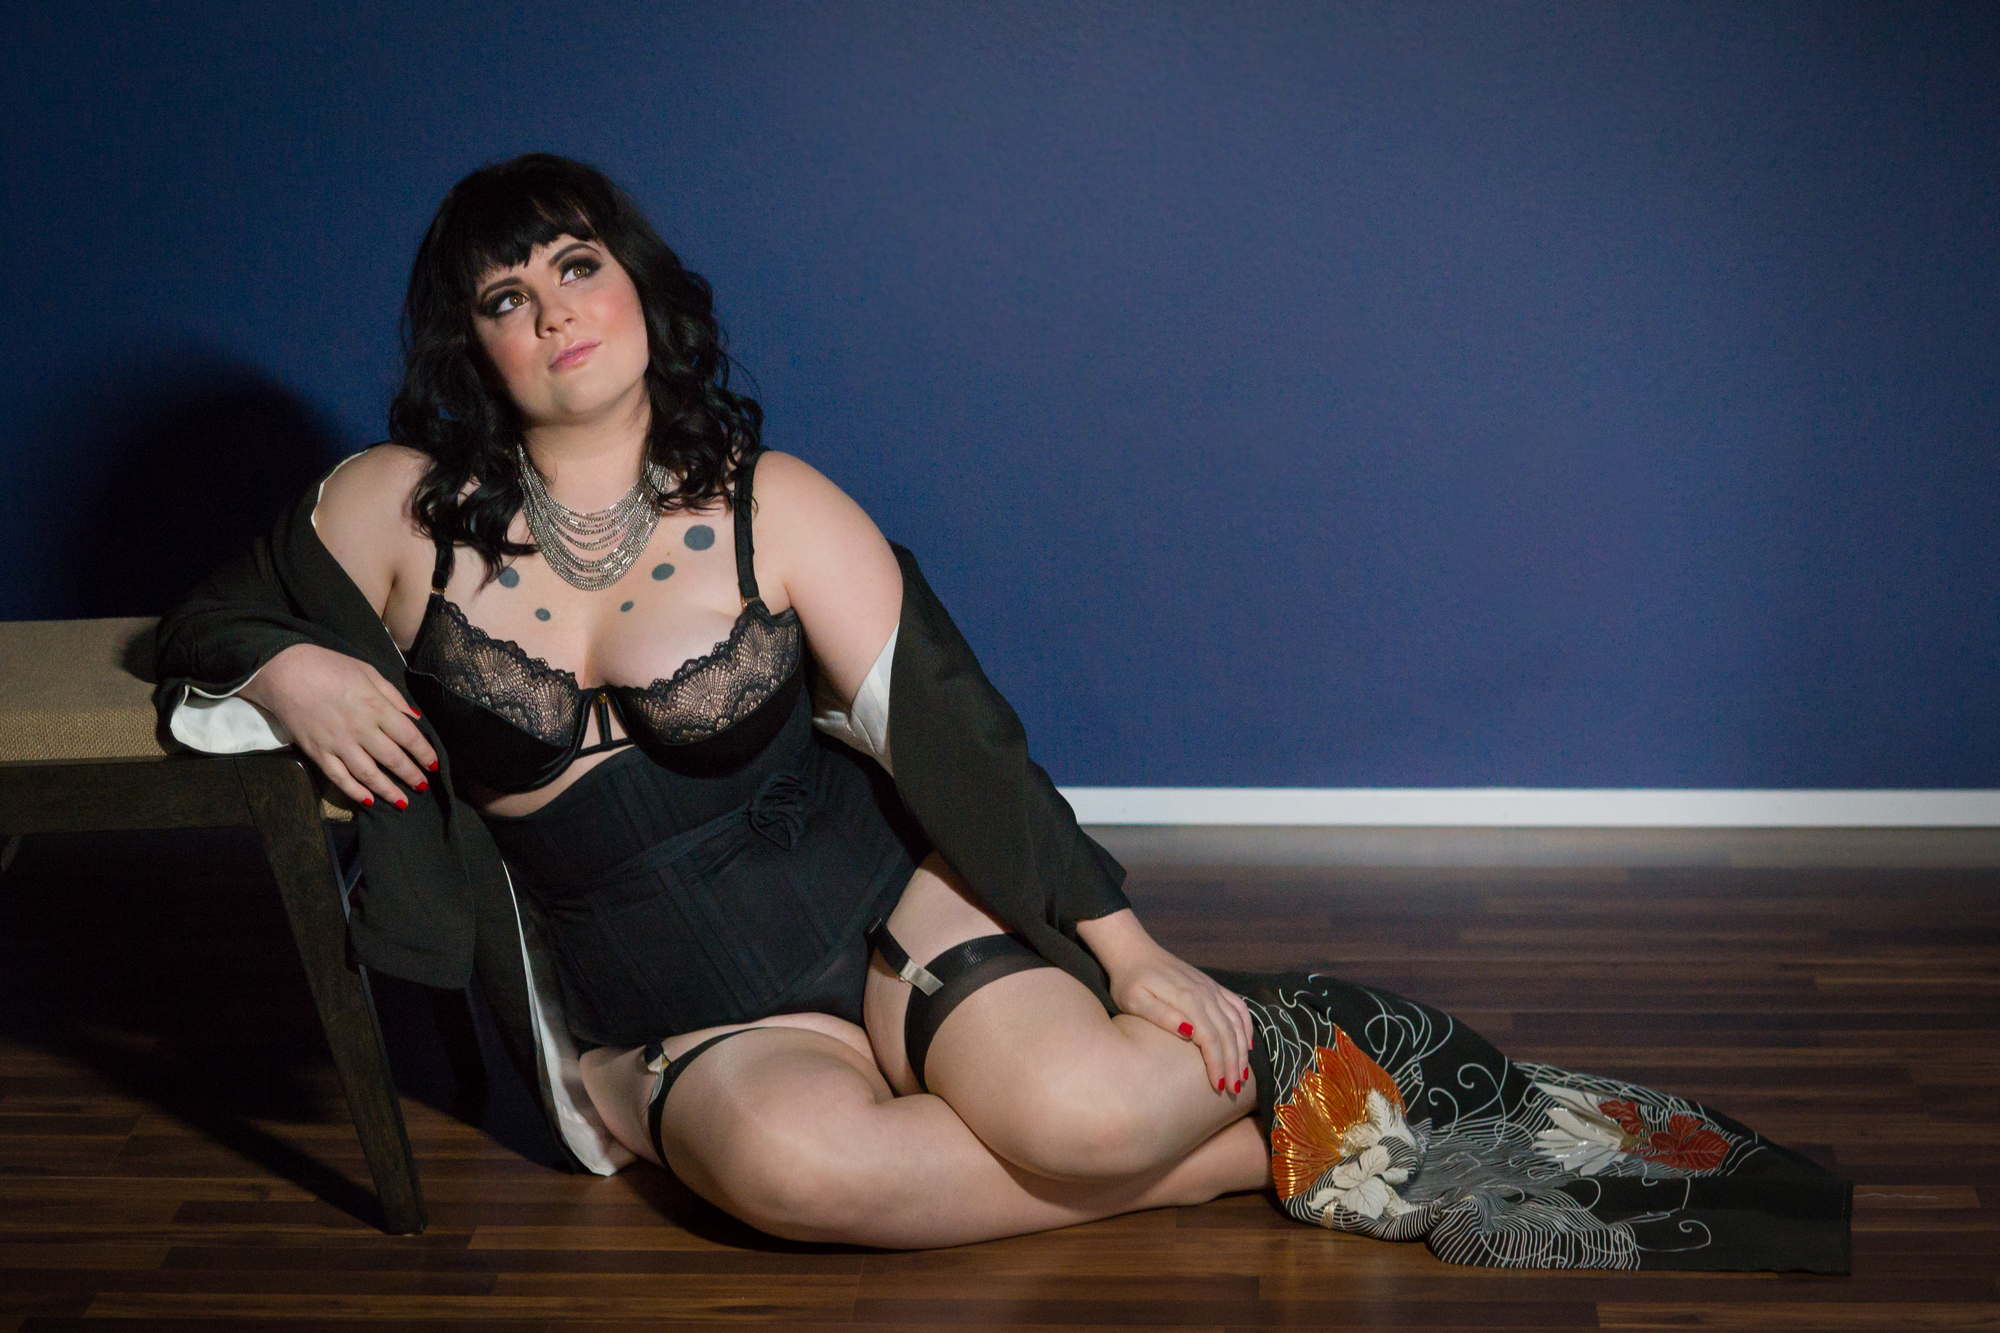 A woman in black lingerie leans against a bench on the floor during an LGBT friendly photo shoot in the PNW